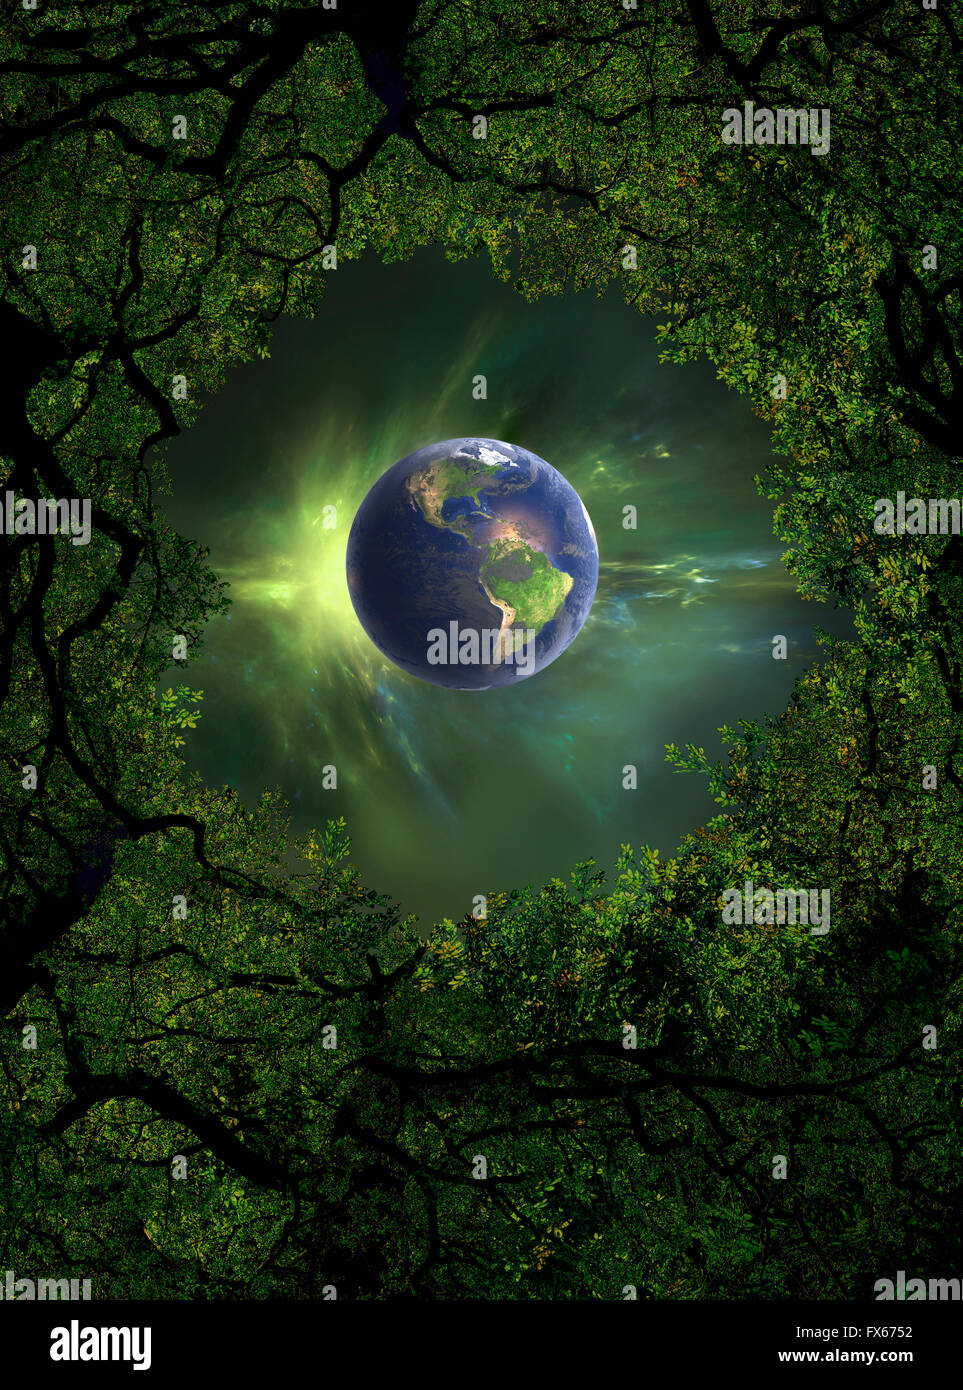 Low angle view of Earth, night sky and tree canopy Stock Photo